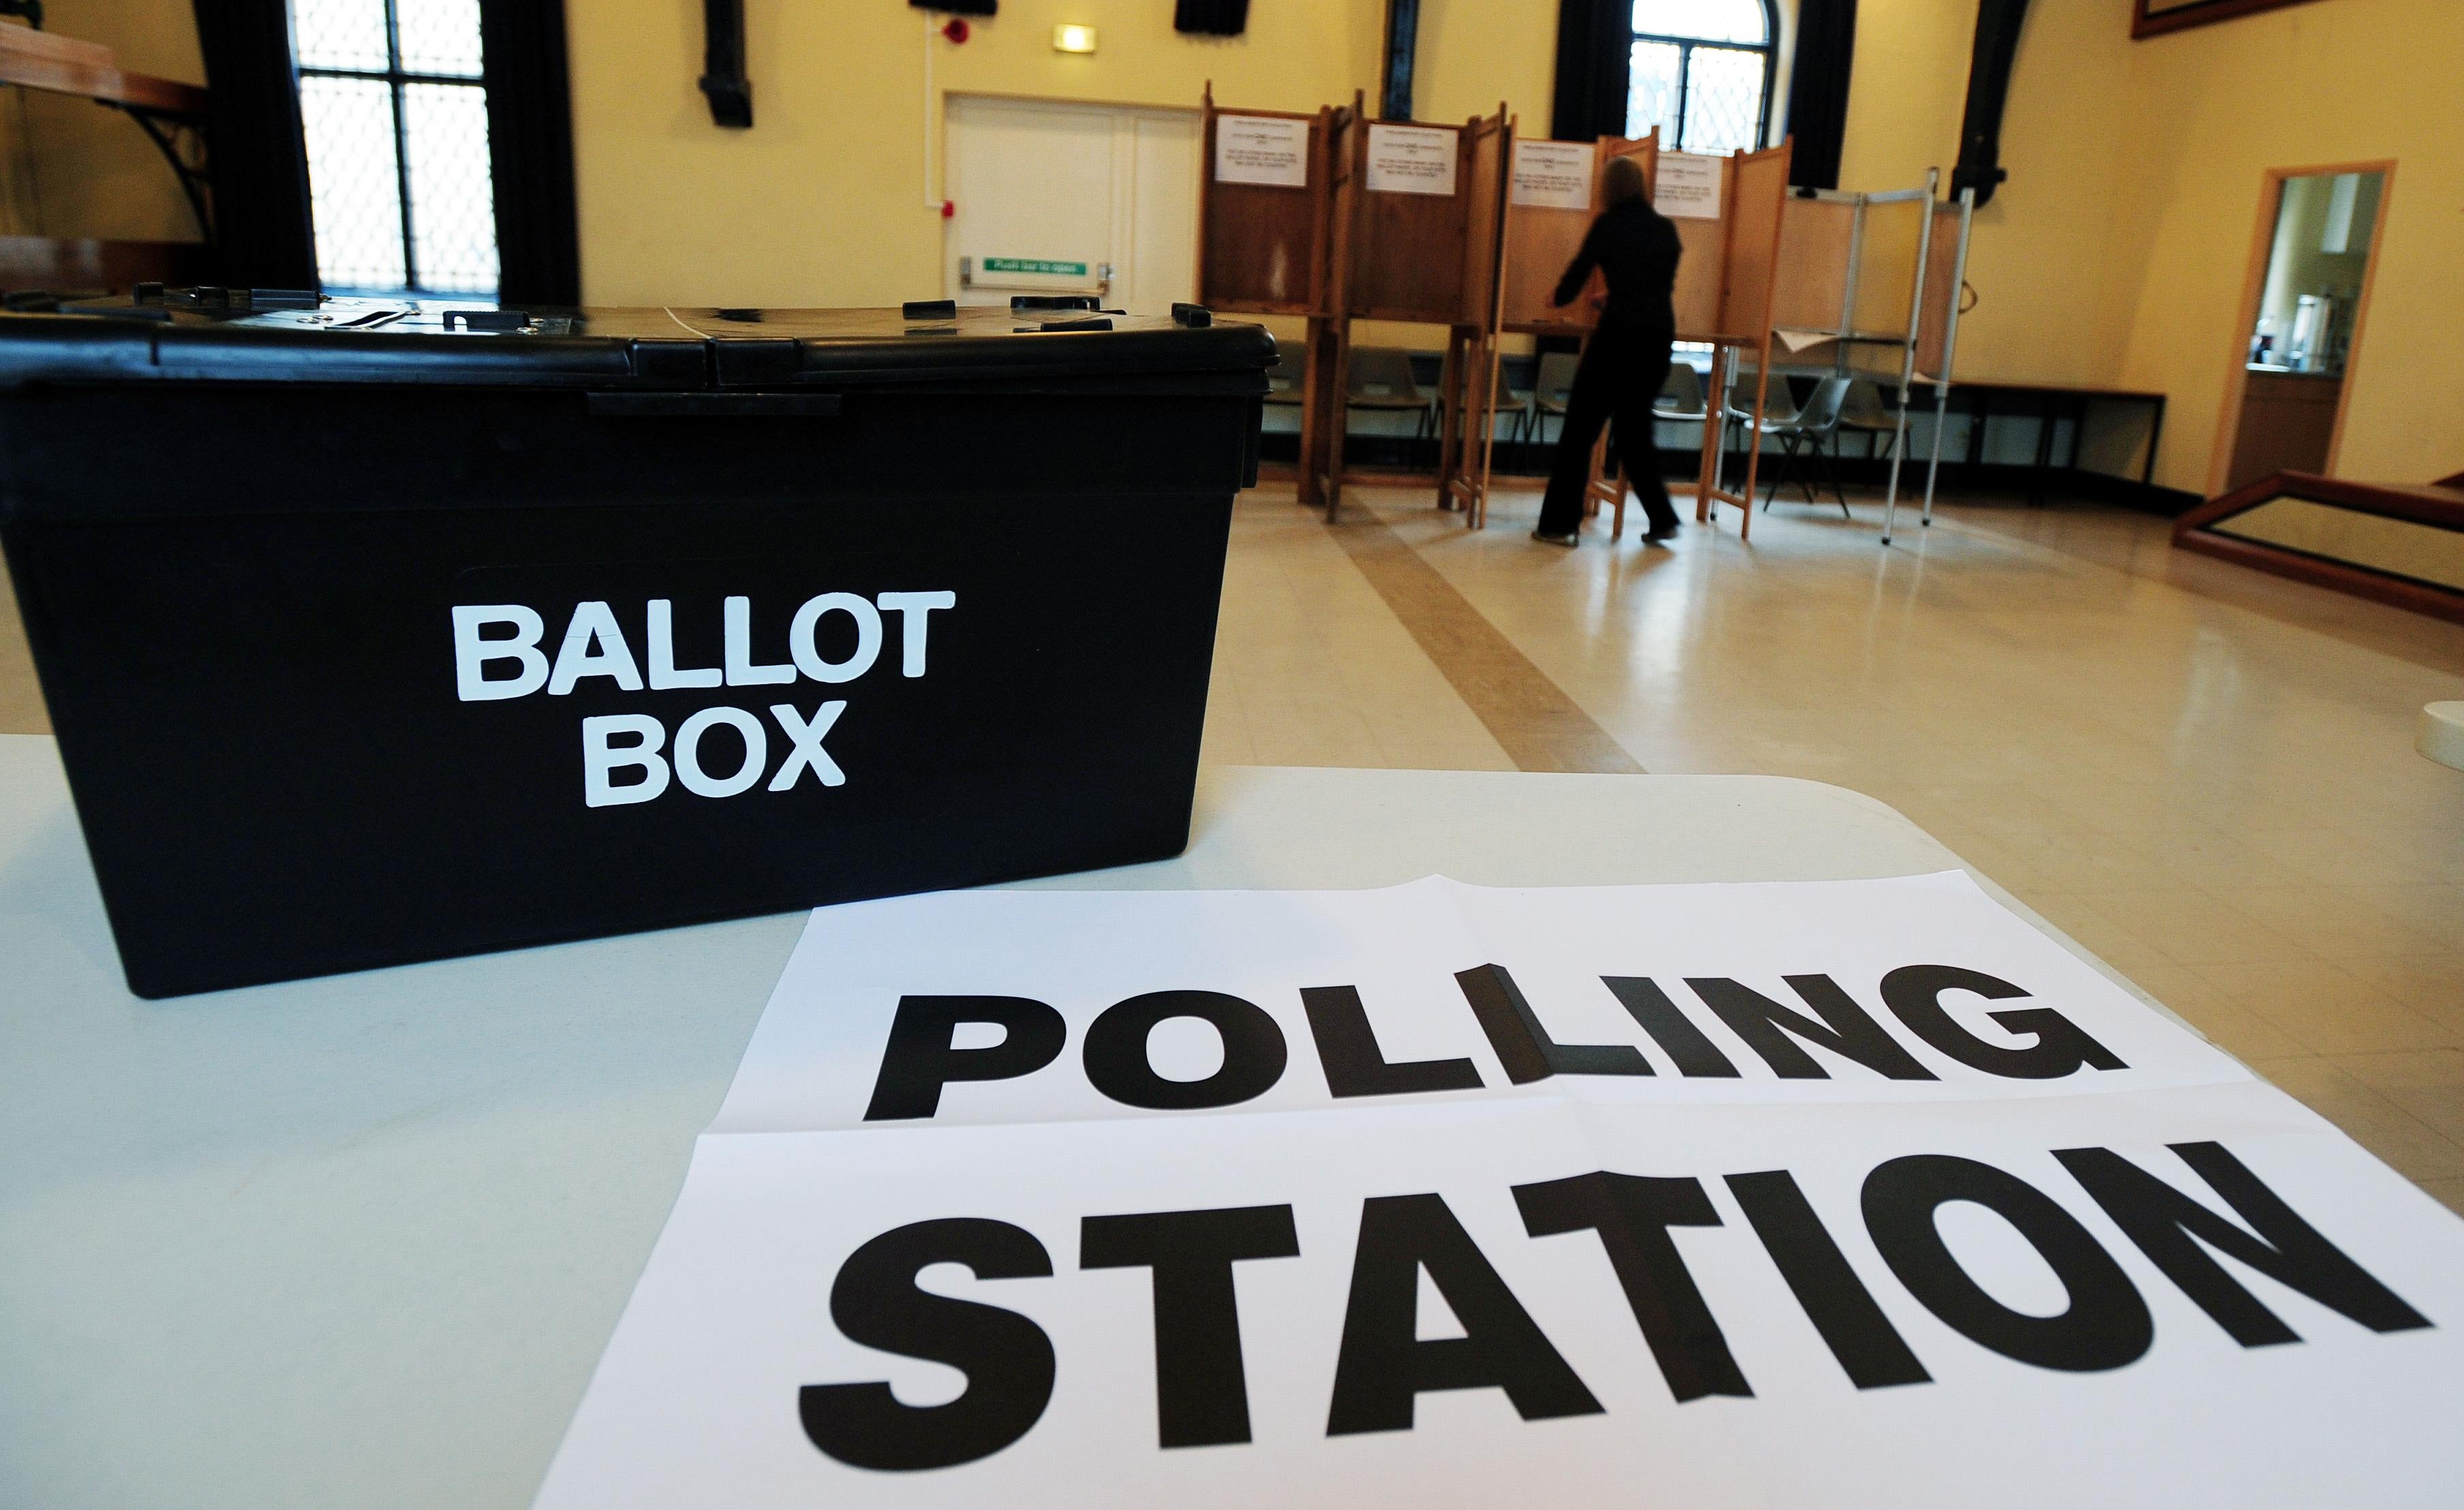 A ballot box at a polling station. Electoral Commission chair John Pullinger has said proposed reforms to election law are a ‘threat’ to the commission’s independence. (Rui Vieira/PA)